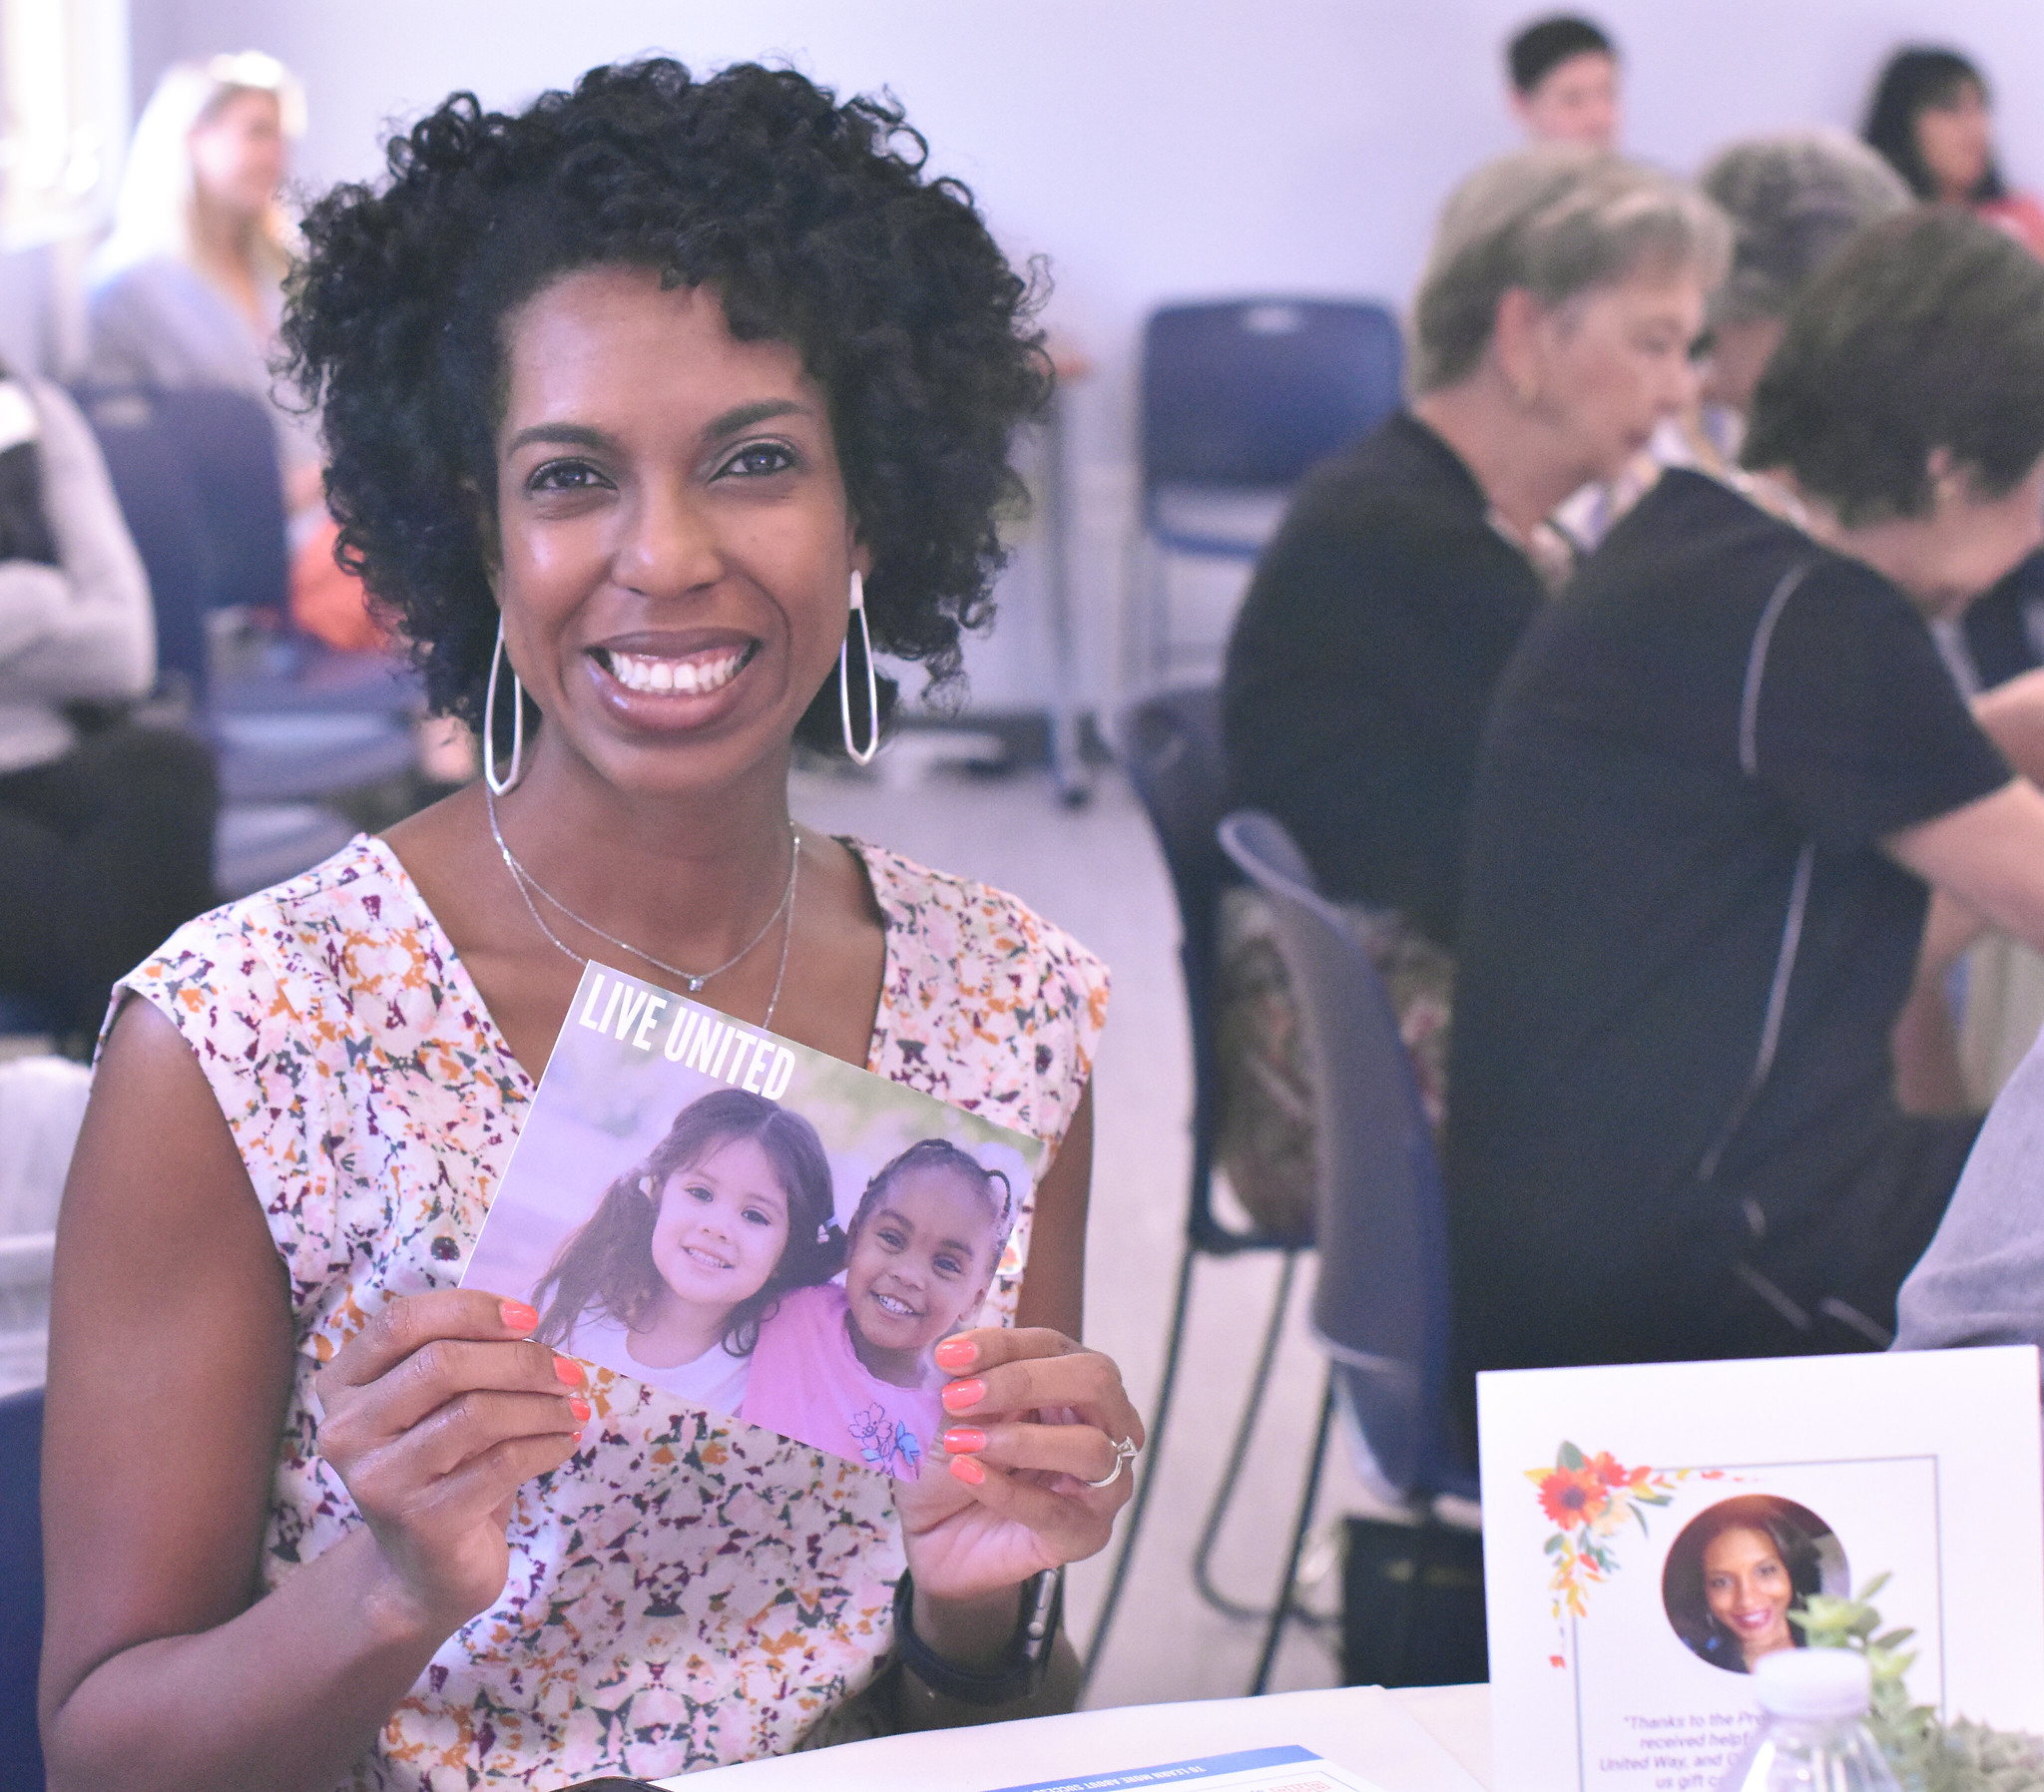 Meet Michele, A Passionate Early Childhood Champion